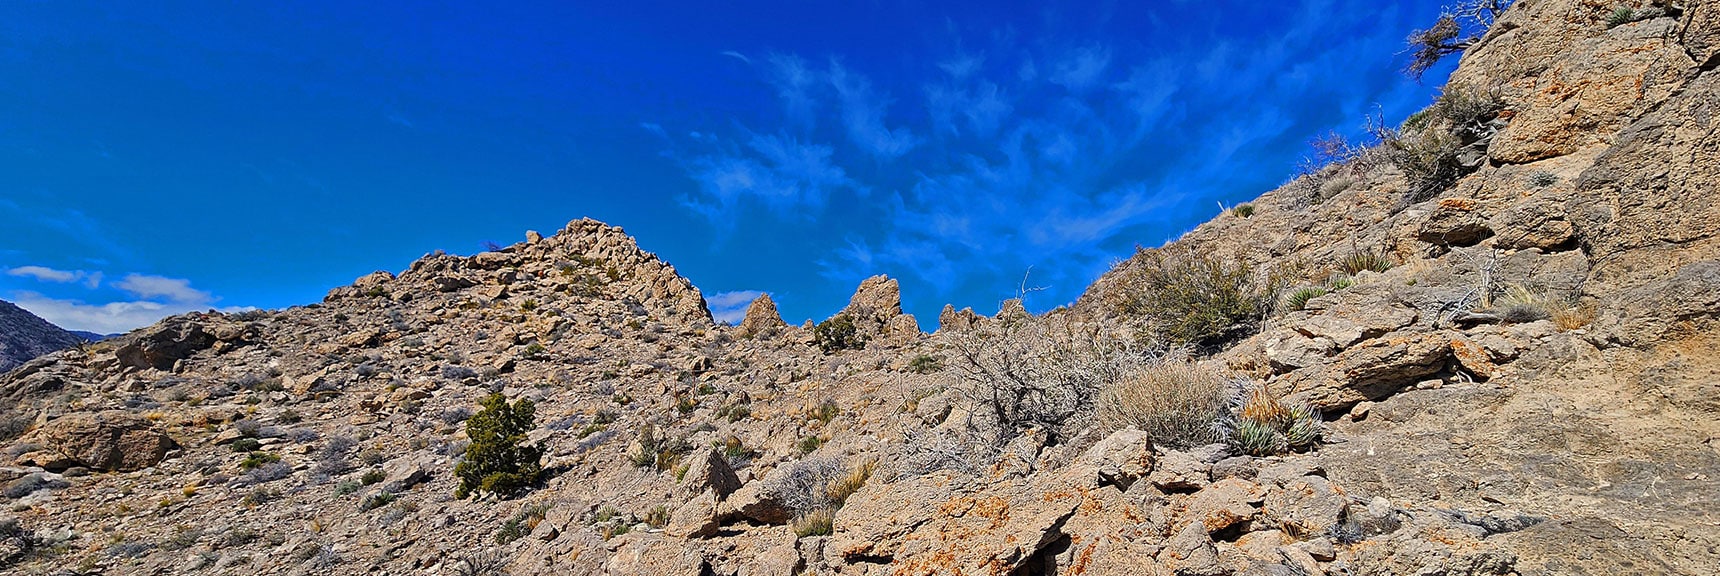 Round High Point, Descend at Central Pinnacle. | Gray Cap Ridge / Brownstone Basin Loop | La Madre Mountains Wilderness, Nevada